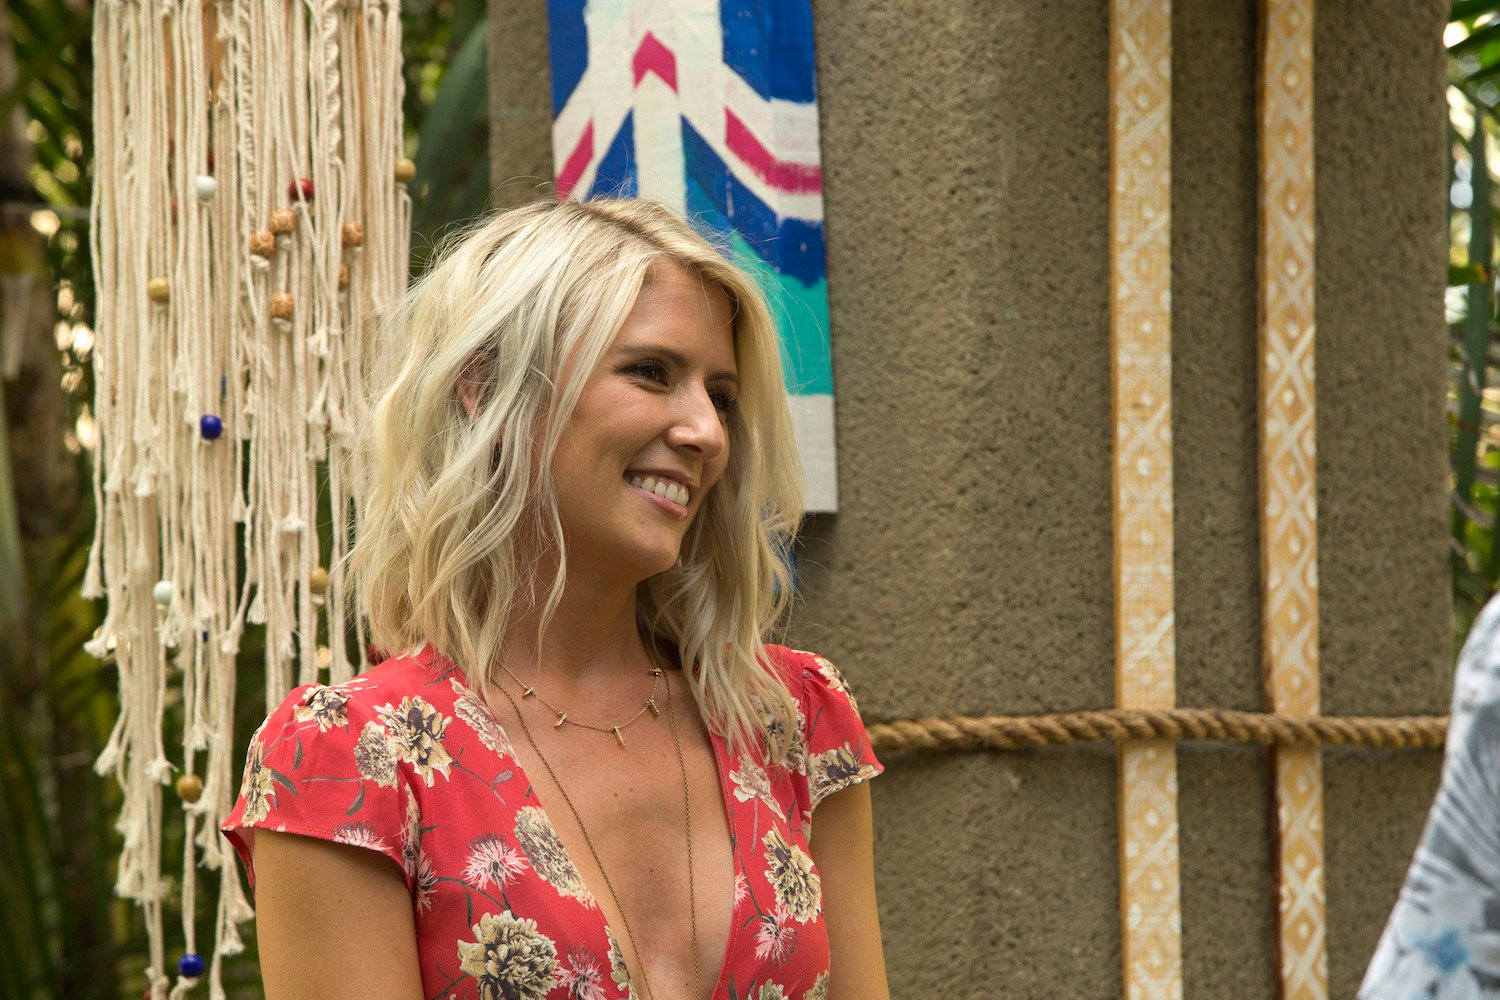 A close-up of Danielle Maltby on 'Bachelor in Paradise' Season 8